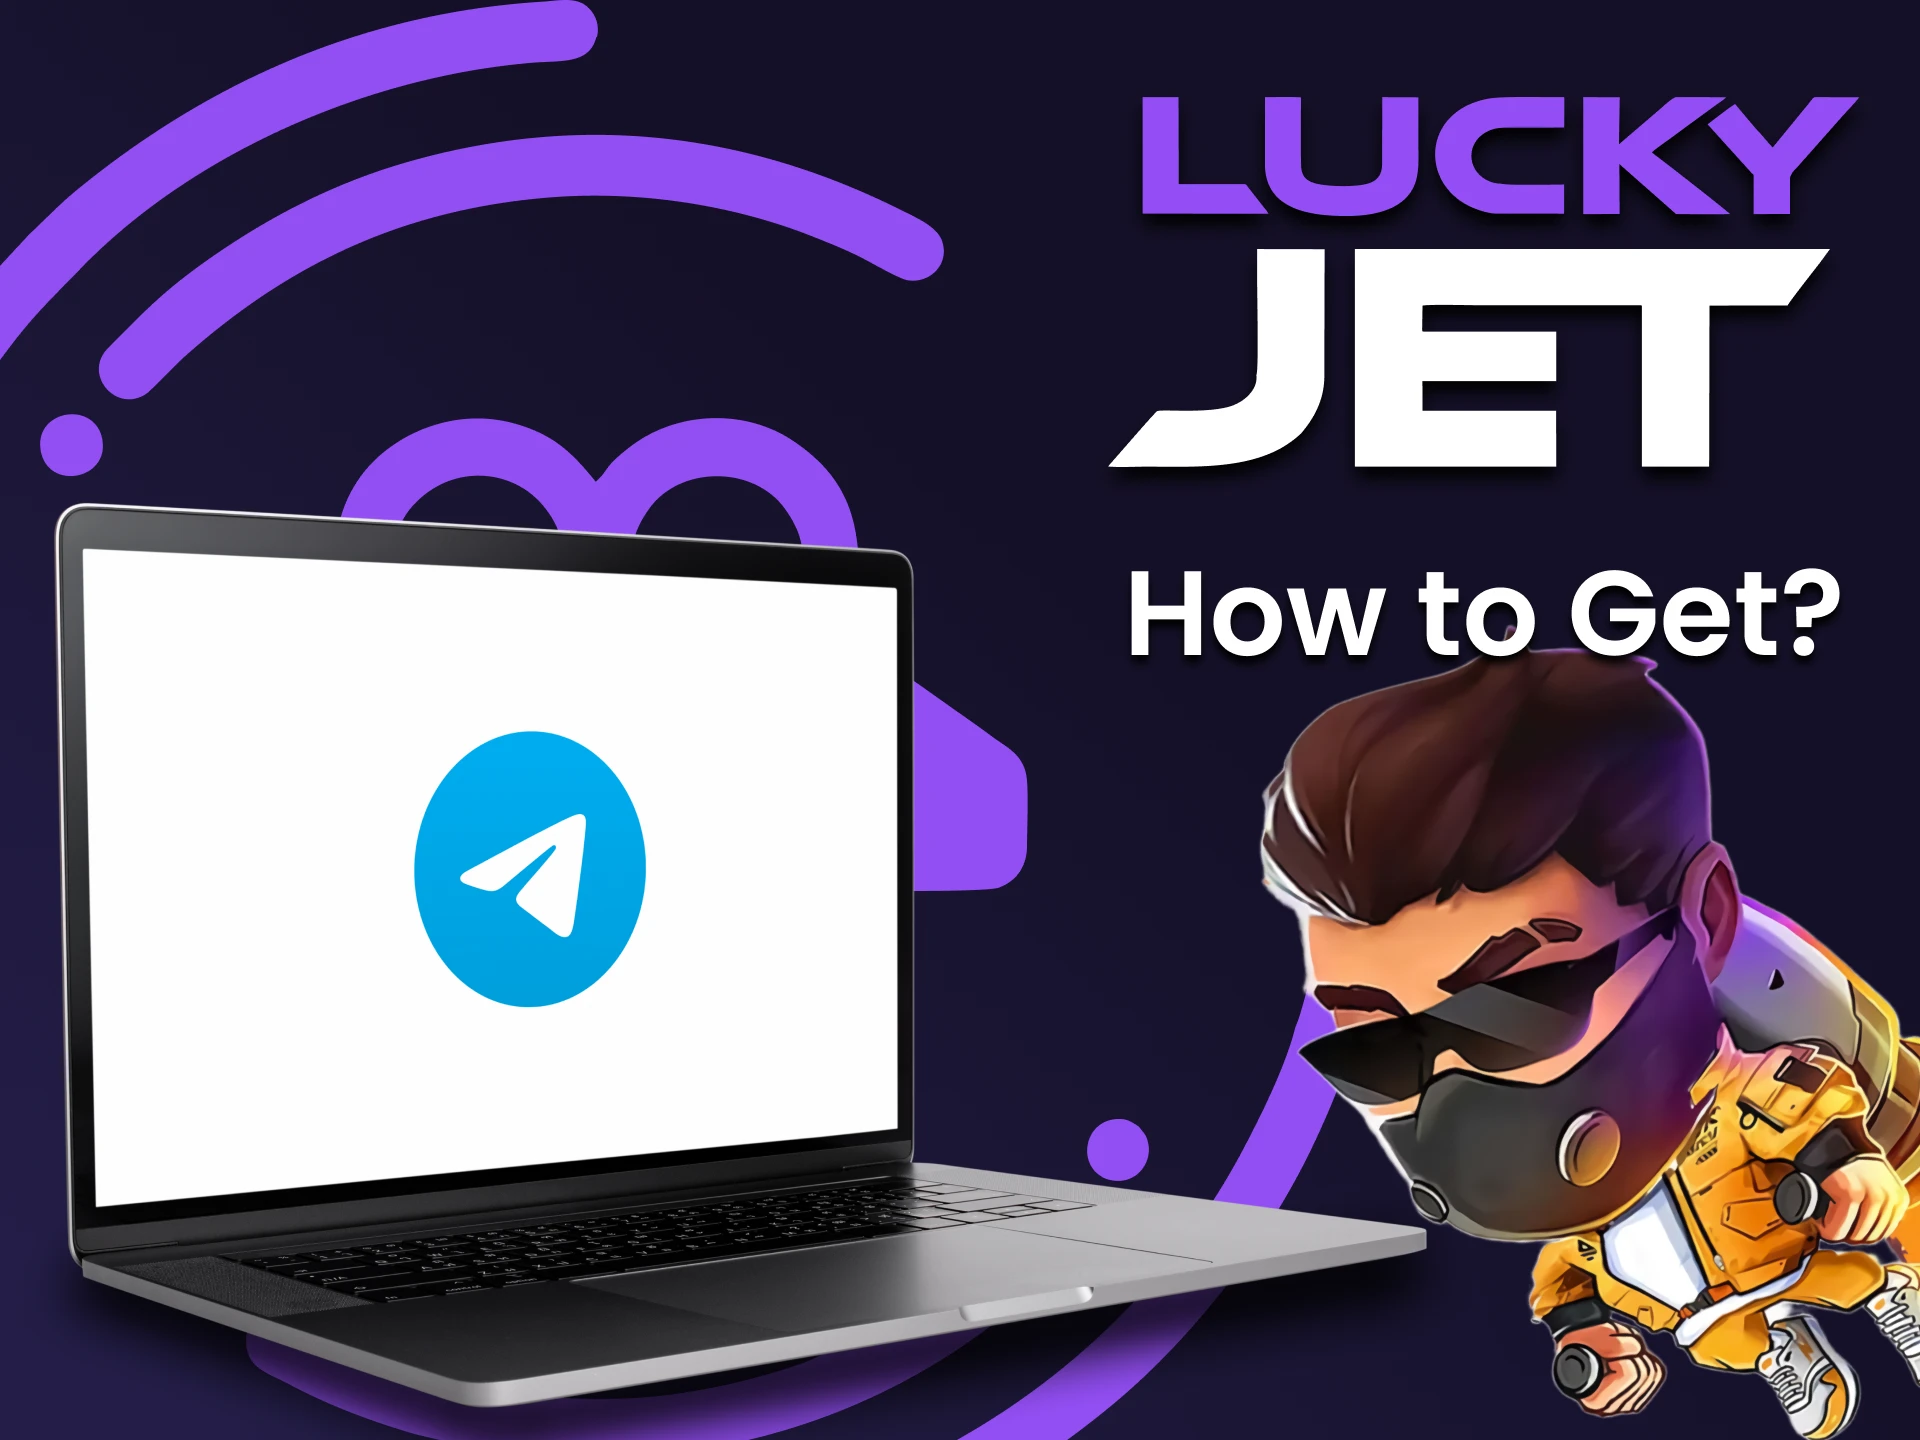 We will tell you how to get signals for Lucky Jet.